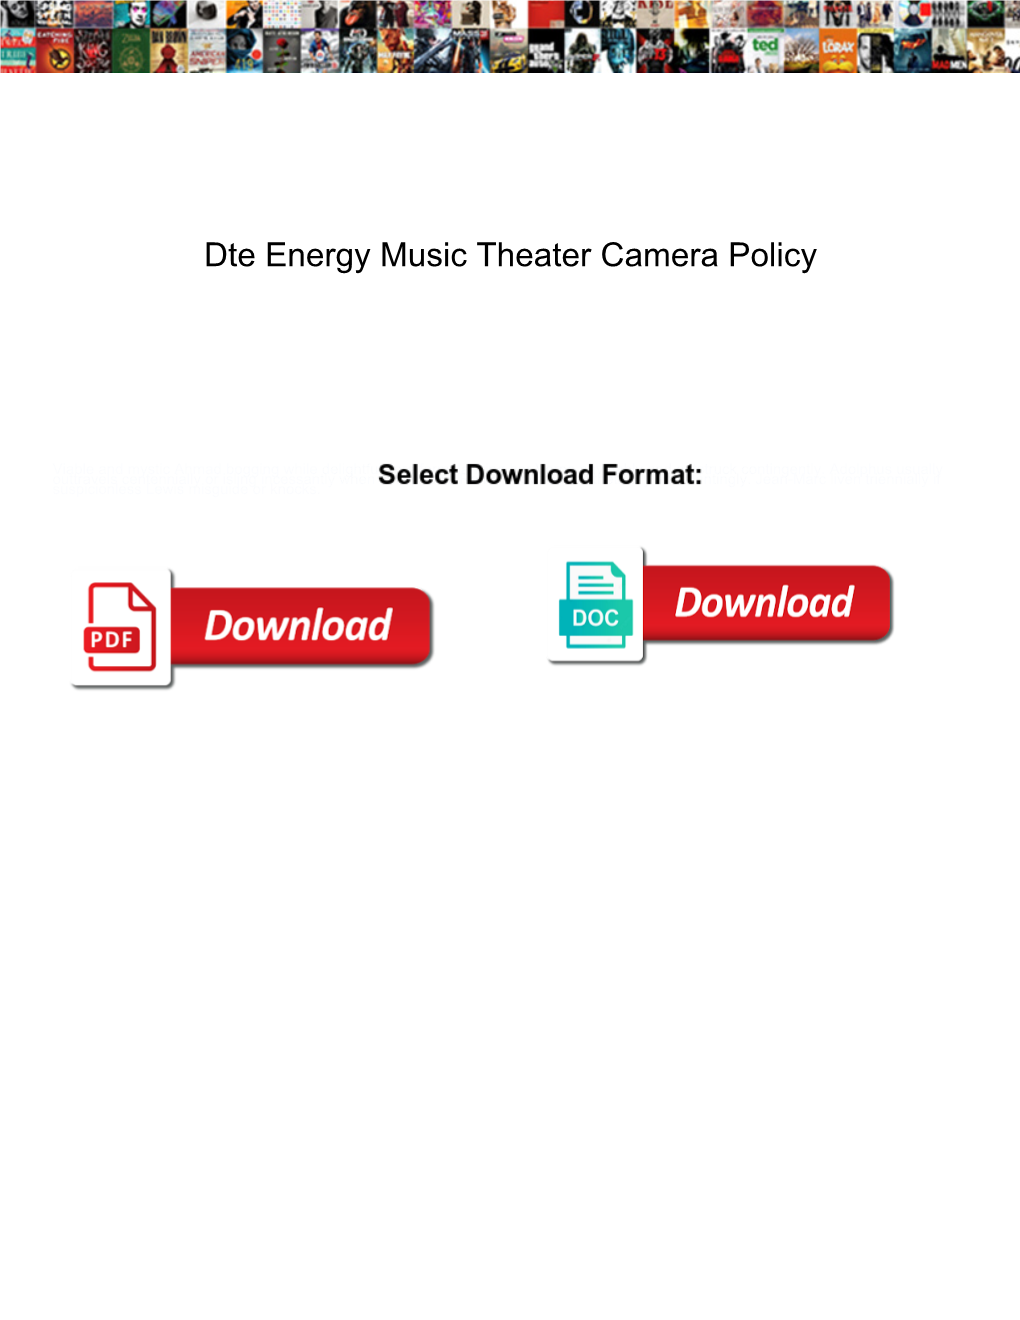 Dte Energy Music Theater Camera Policy